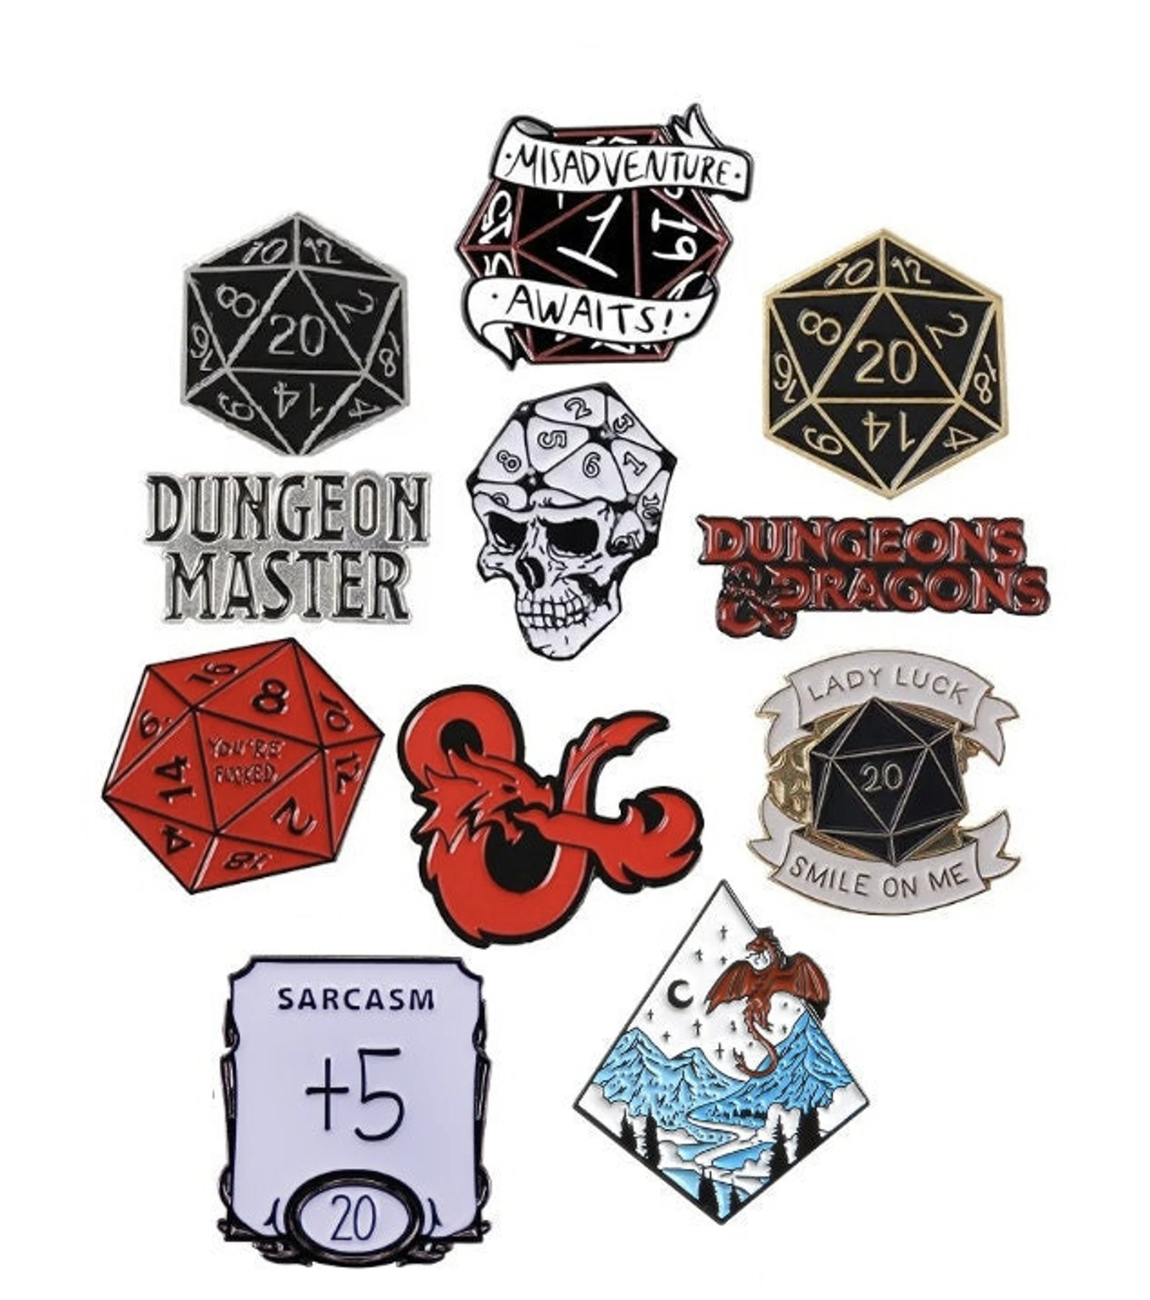 D&D Enamel Pins featuring a variety of D&D slogans and images 